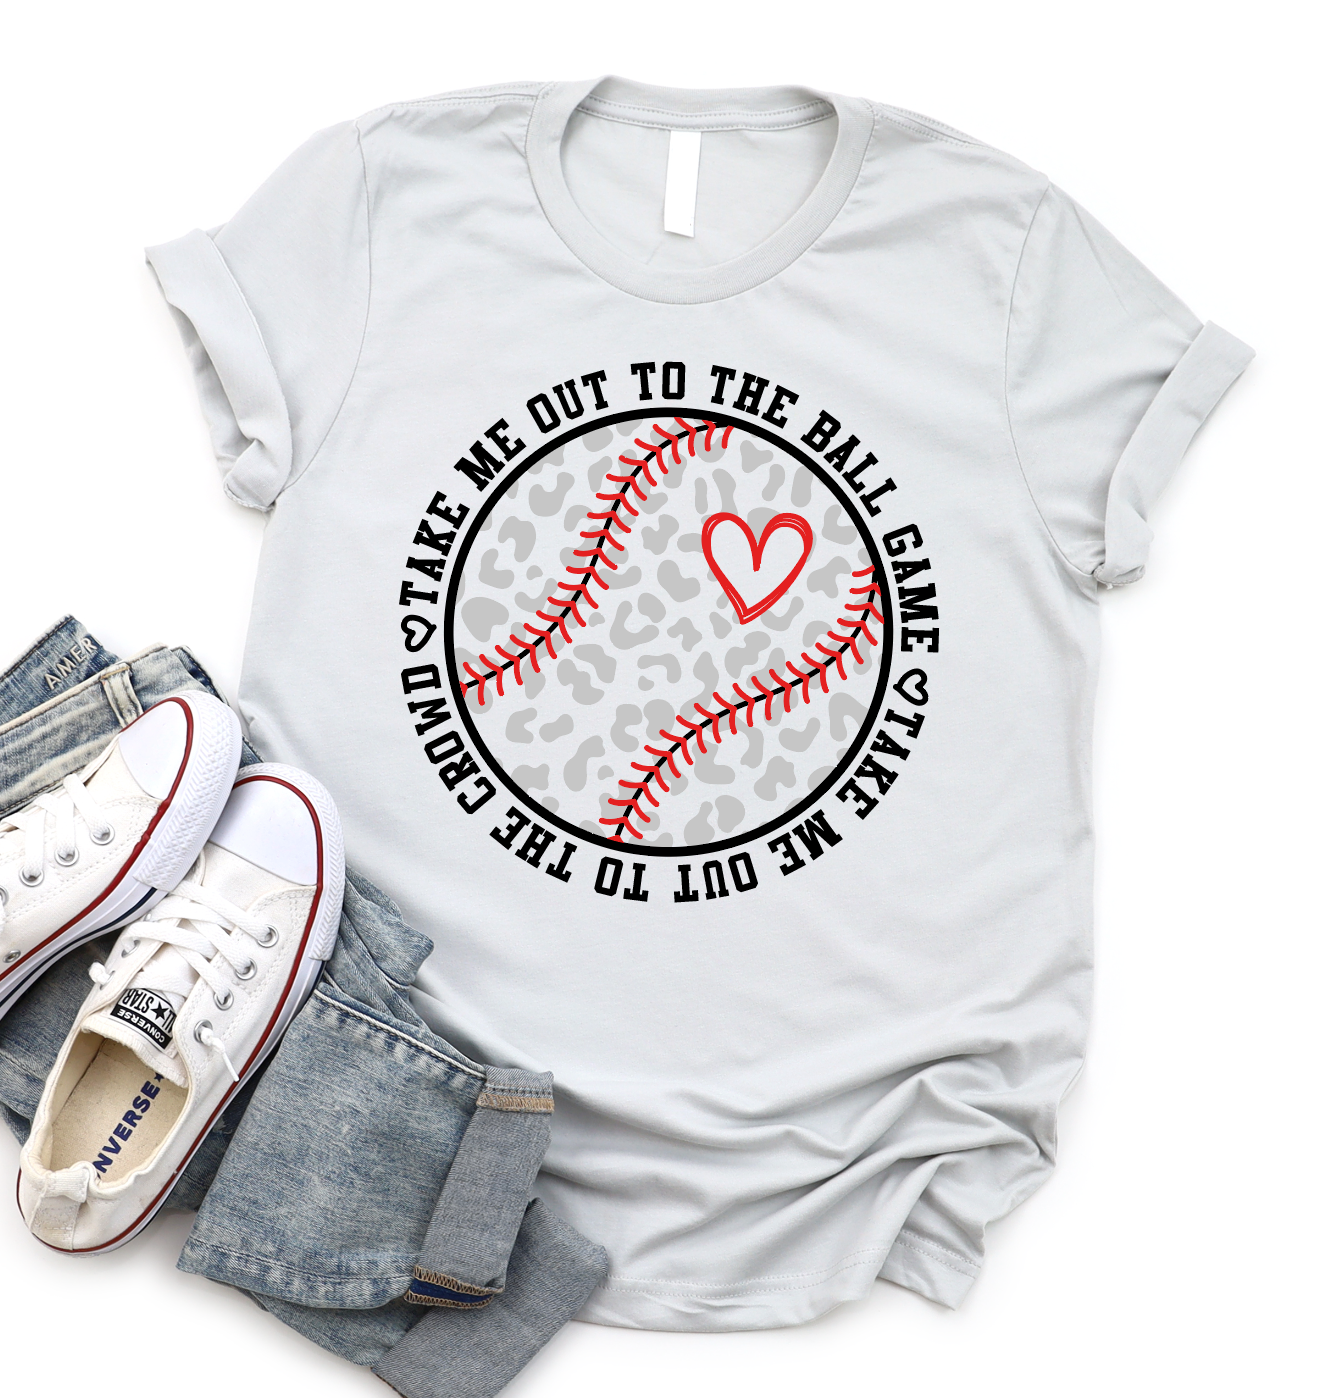 Take Me Out to the Ball Game Graphic T-shirt